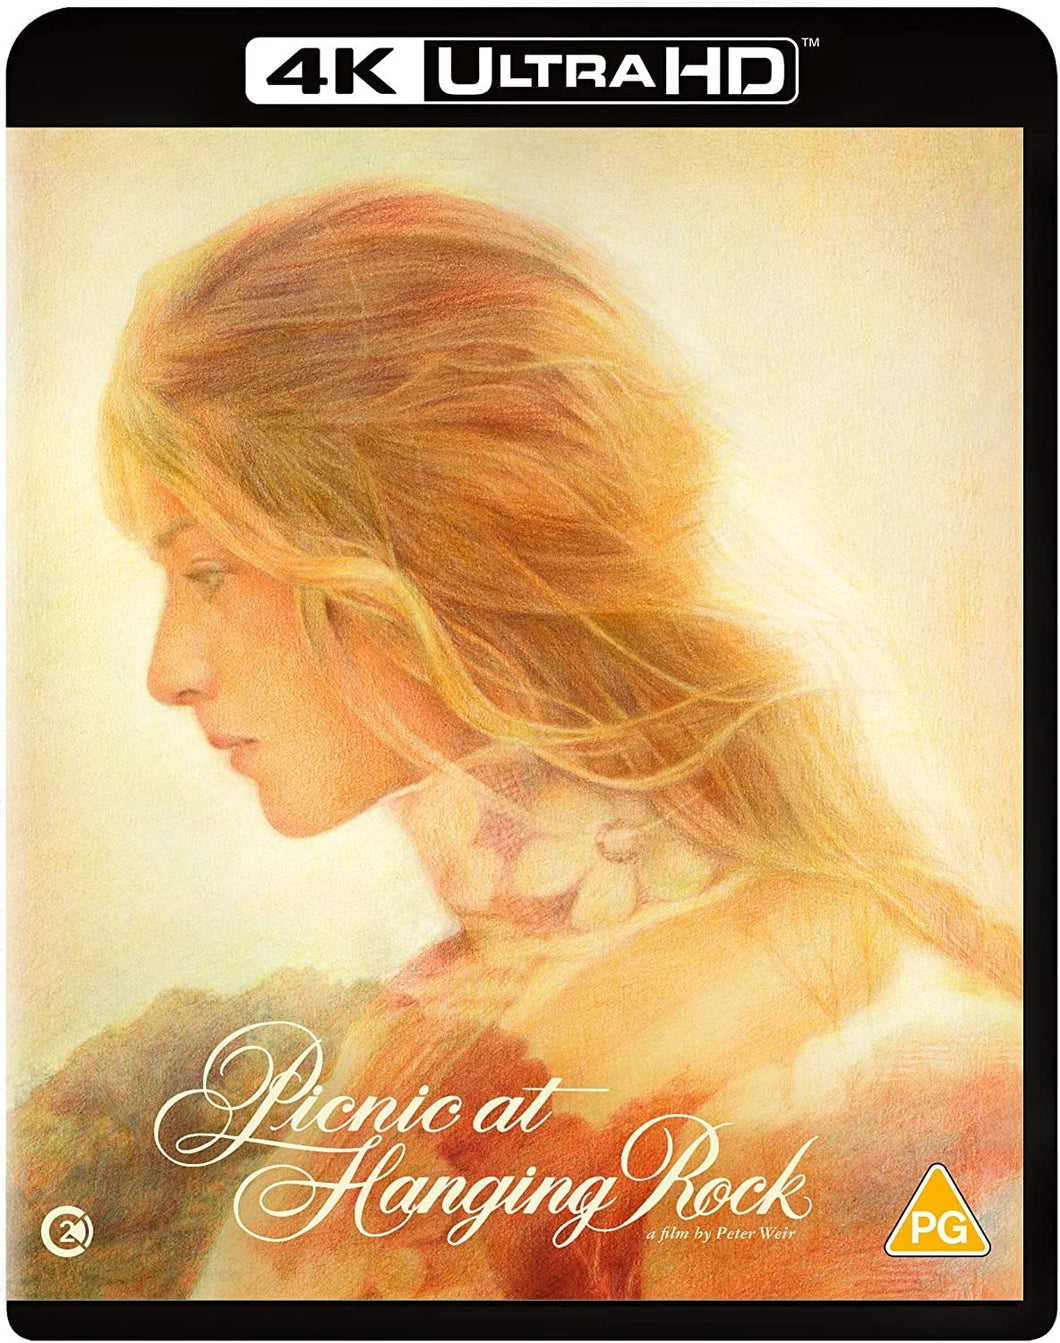 Picnic at Hanging Rock 4K (1975) de Peter Weir - front cover